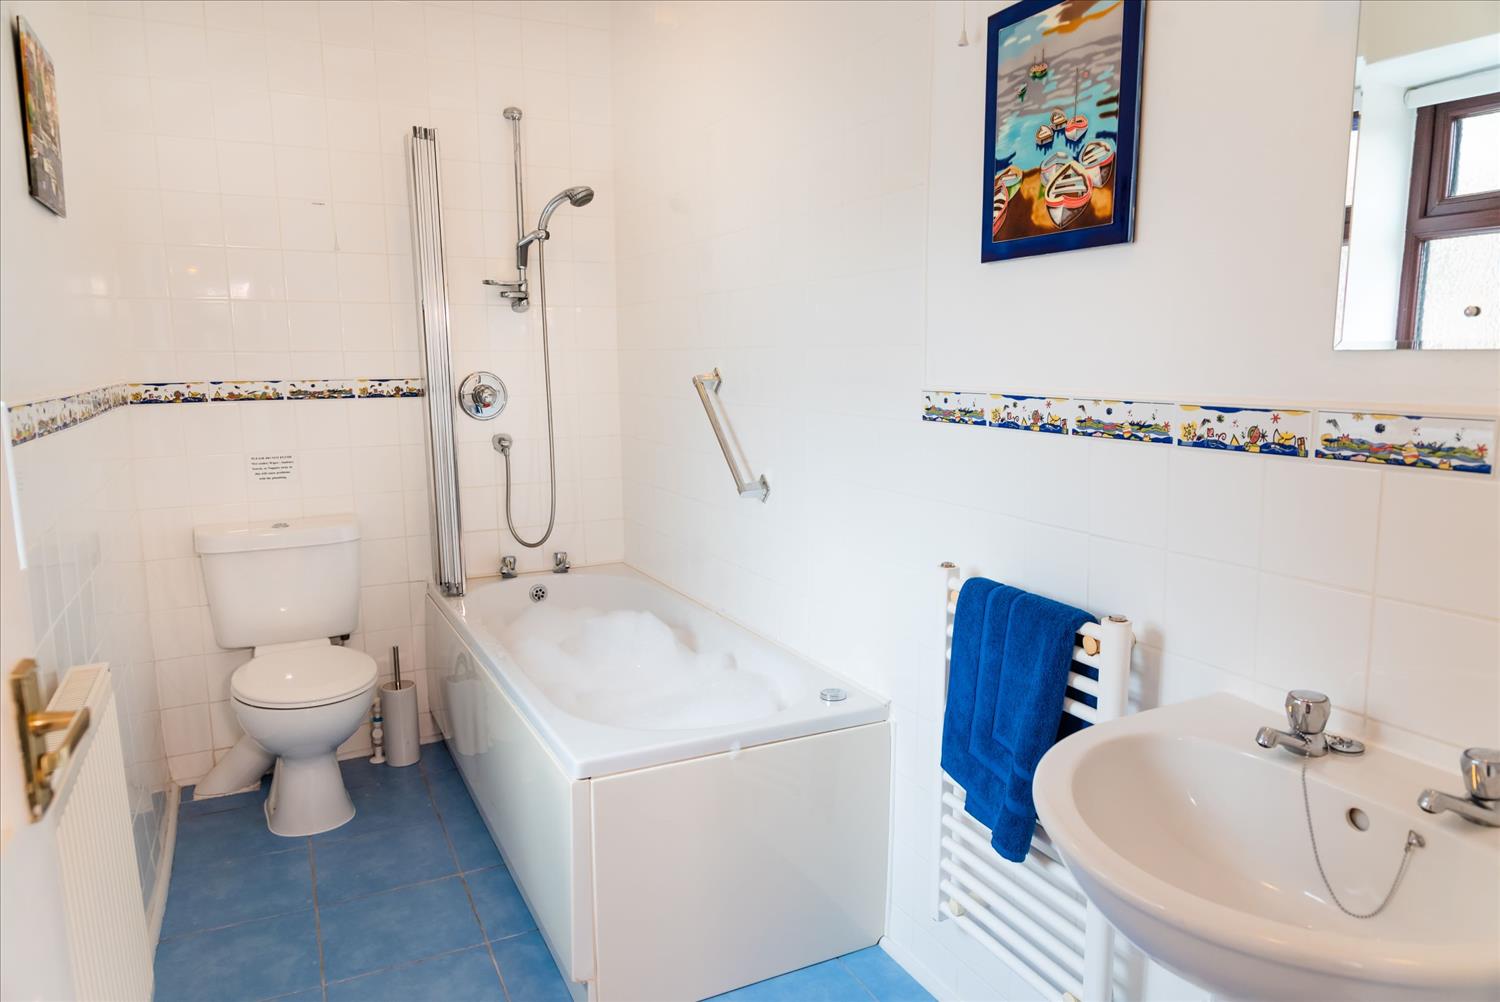 The bathroom at Polrunny Farm's Elderberry Cottage, with foam in the Whirlpool bath and bright coloured pictures on the wall